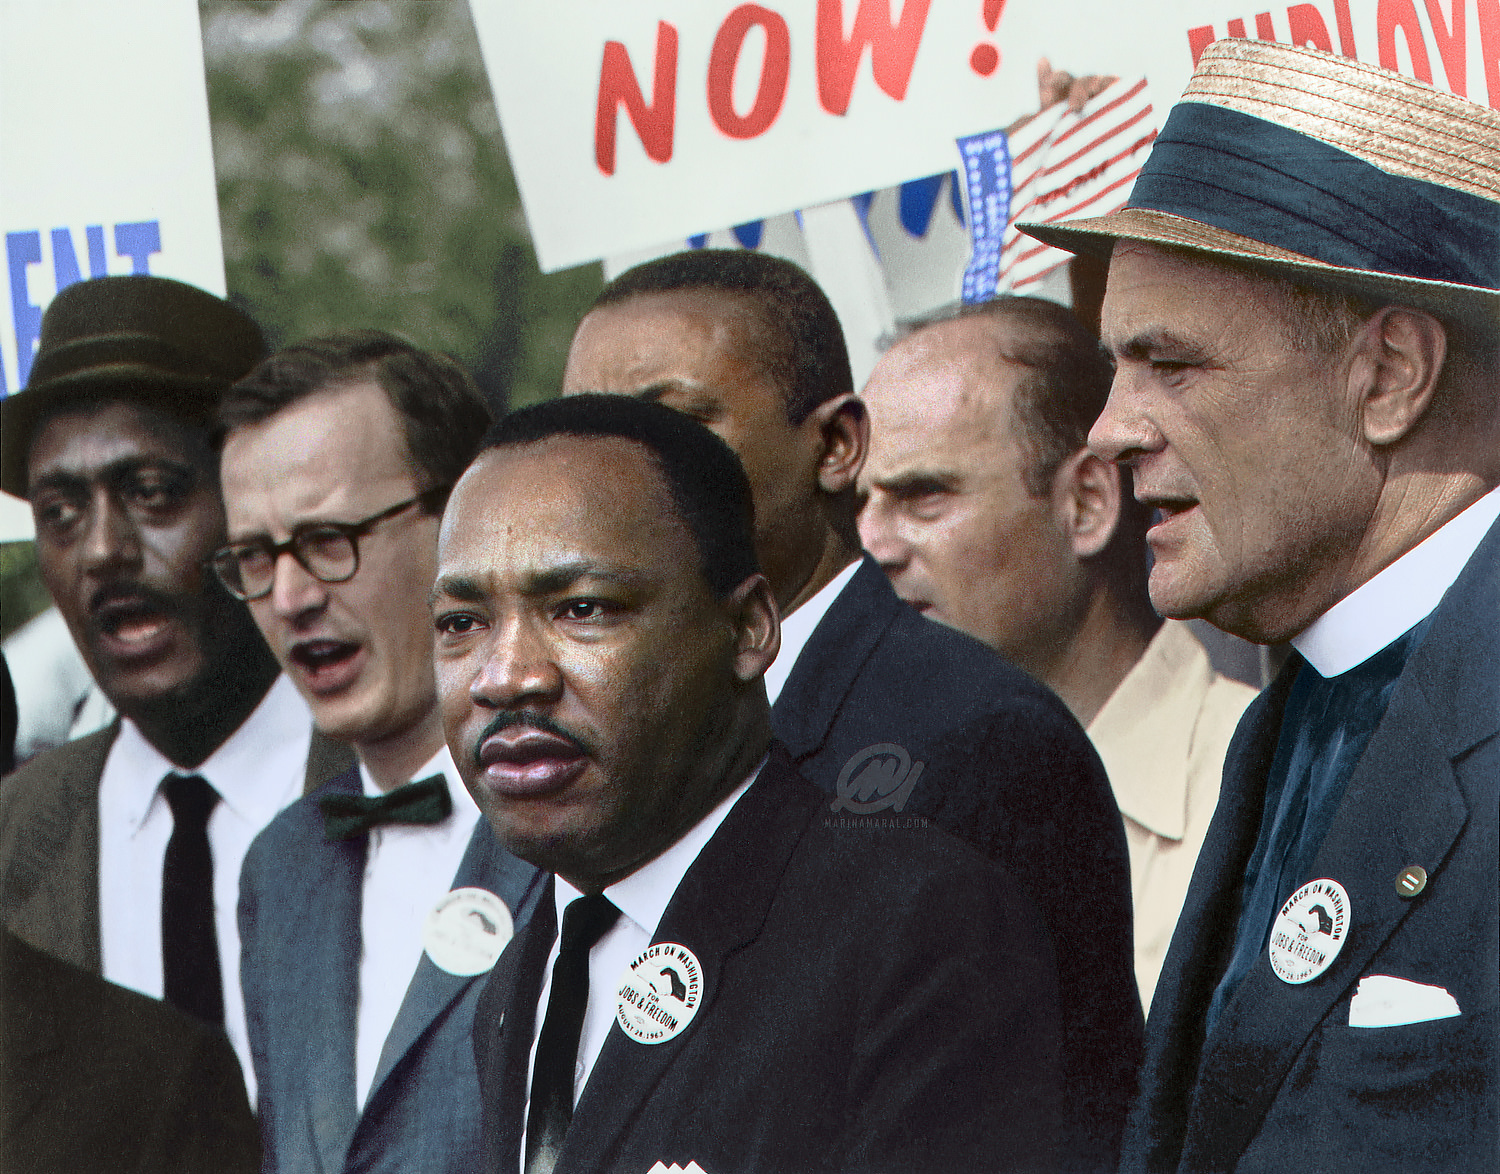 Civil rights march on Washington, D. C. with Dr. Martin Luther King, Jr. and Mathew Ahmann in a crowd.